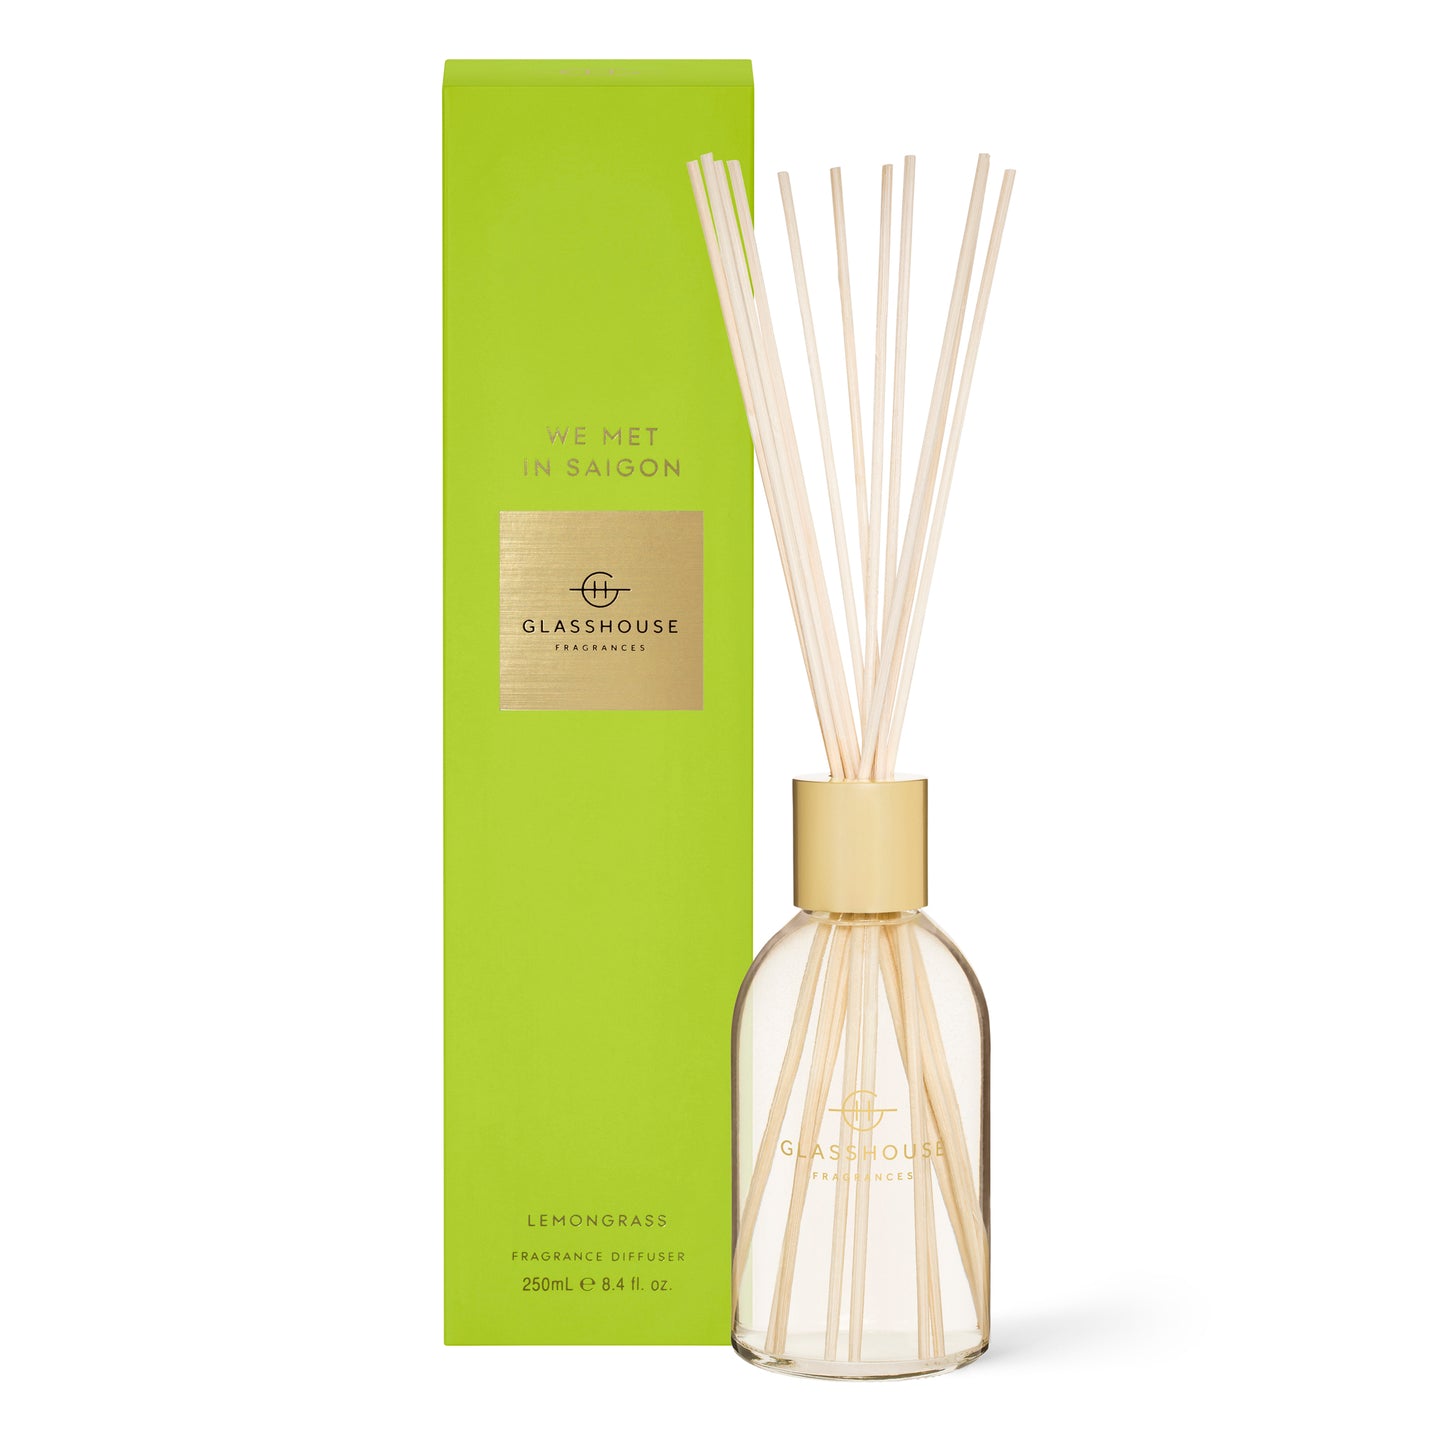 We Met in Saigon by Glasshouse. Fragrance-Diffuser